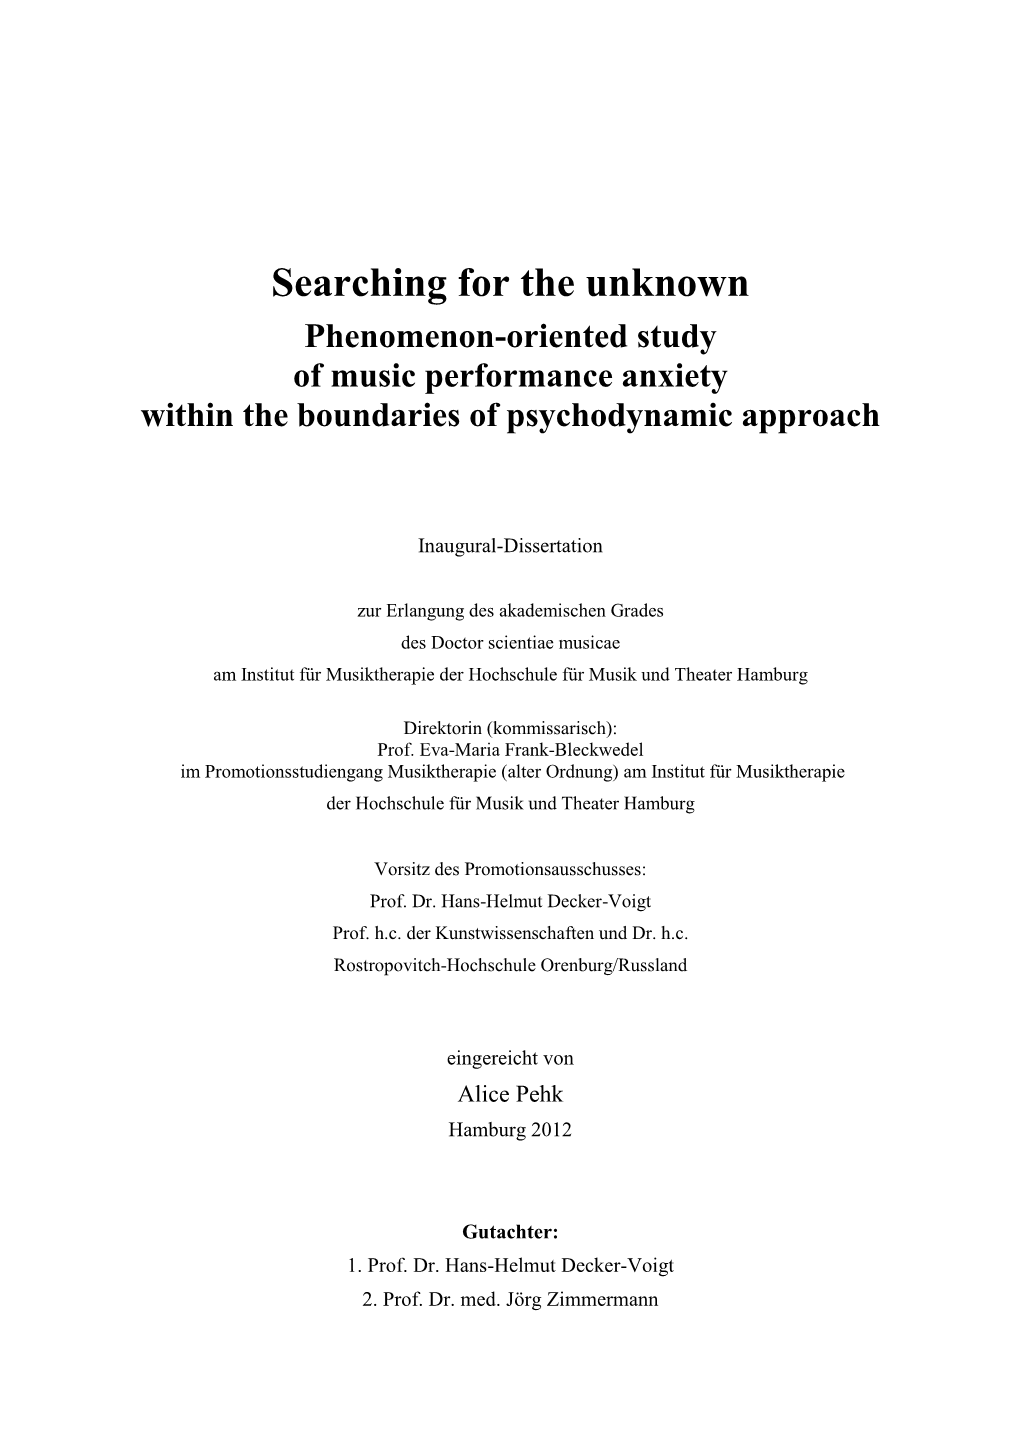 Searching for the Unknown Phenomenon-Oriented Study of Music Performance Anxiety Within the Boundaries of Psychodynamic Approach